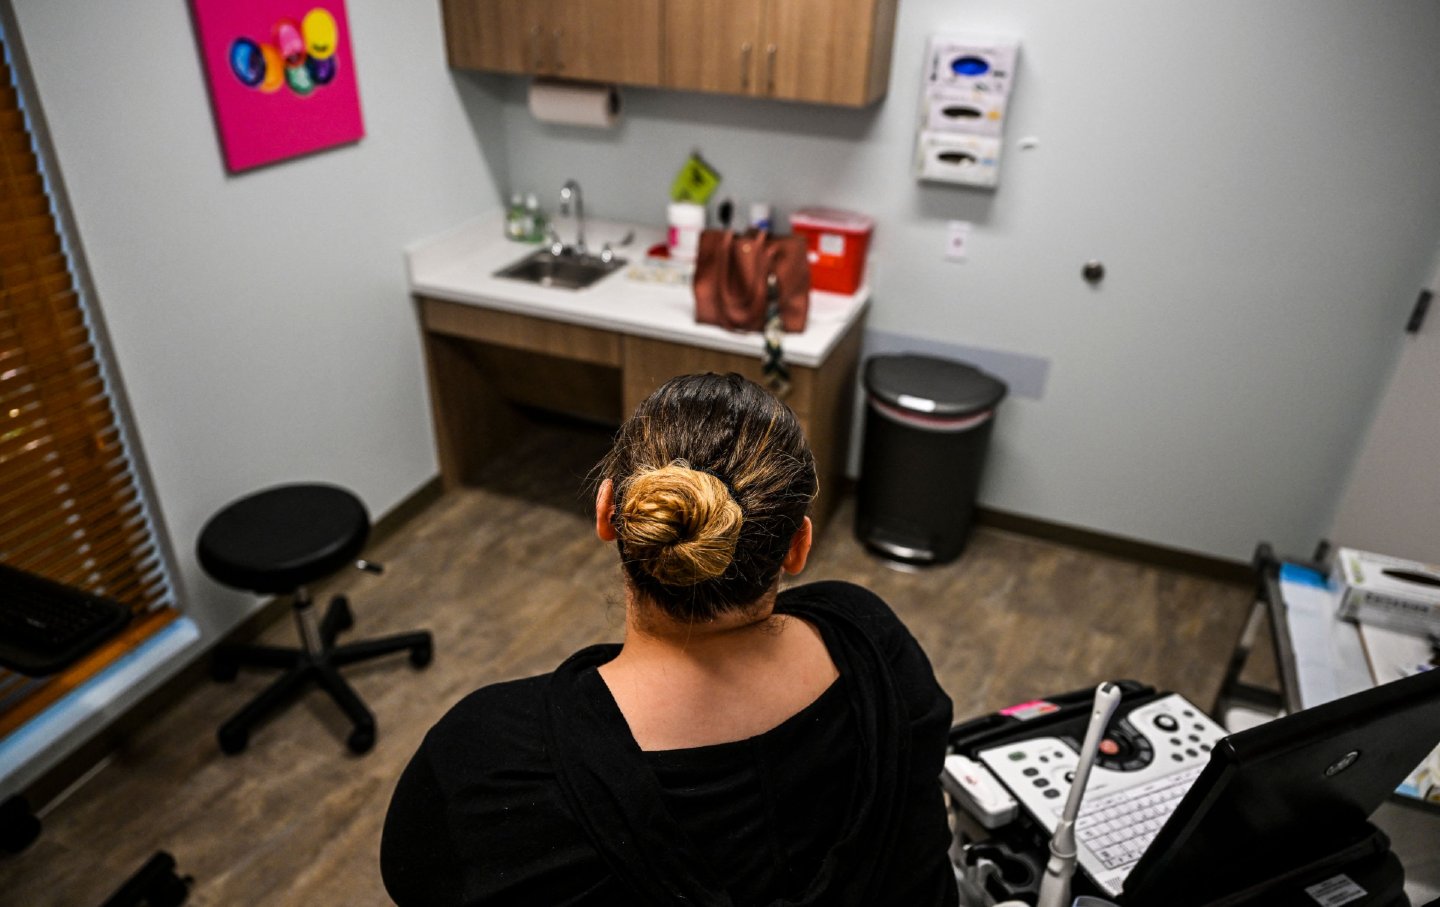 Jasmine, 23, waits to receive an abortion at a Planned Parenthood Abortion Clinic in West Palm Beach, Fla.